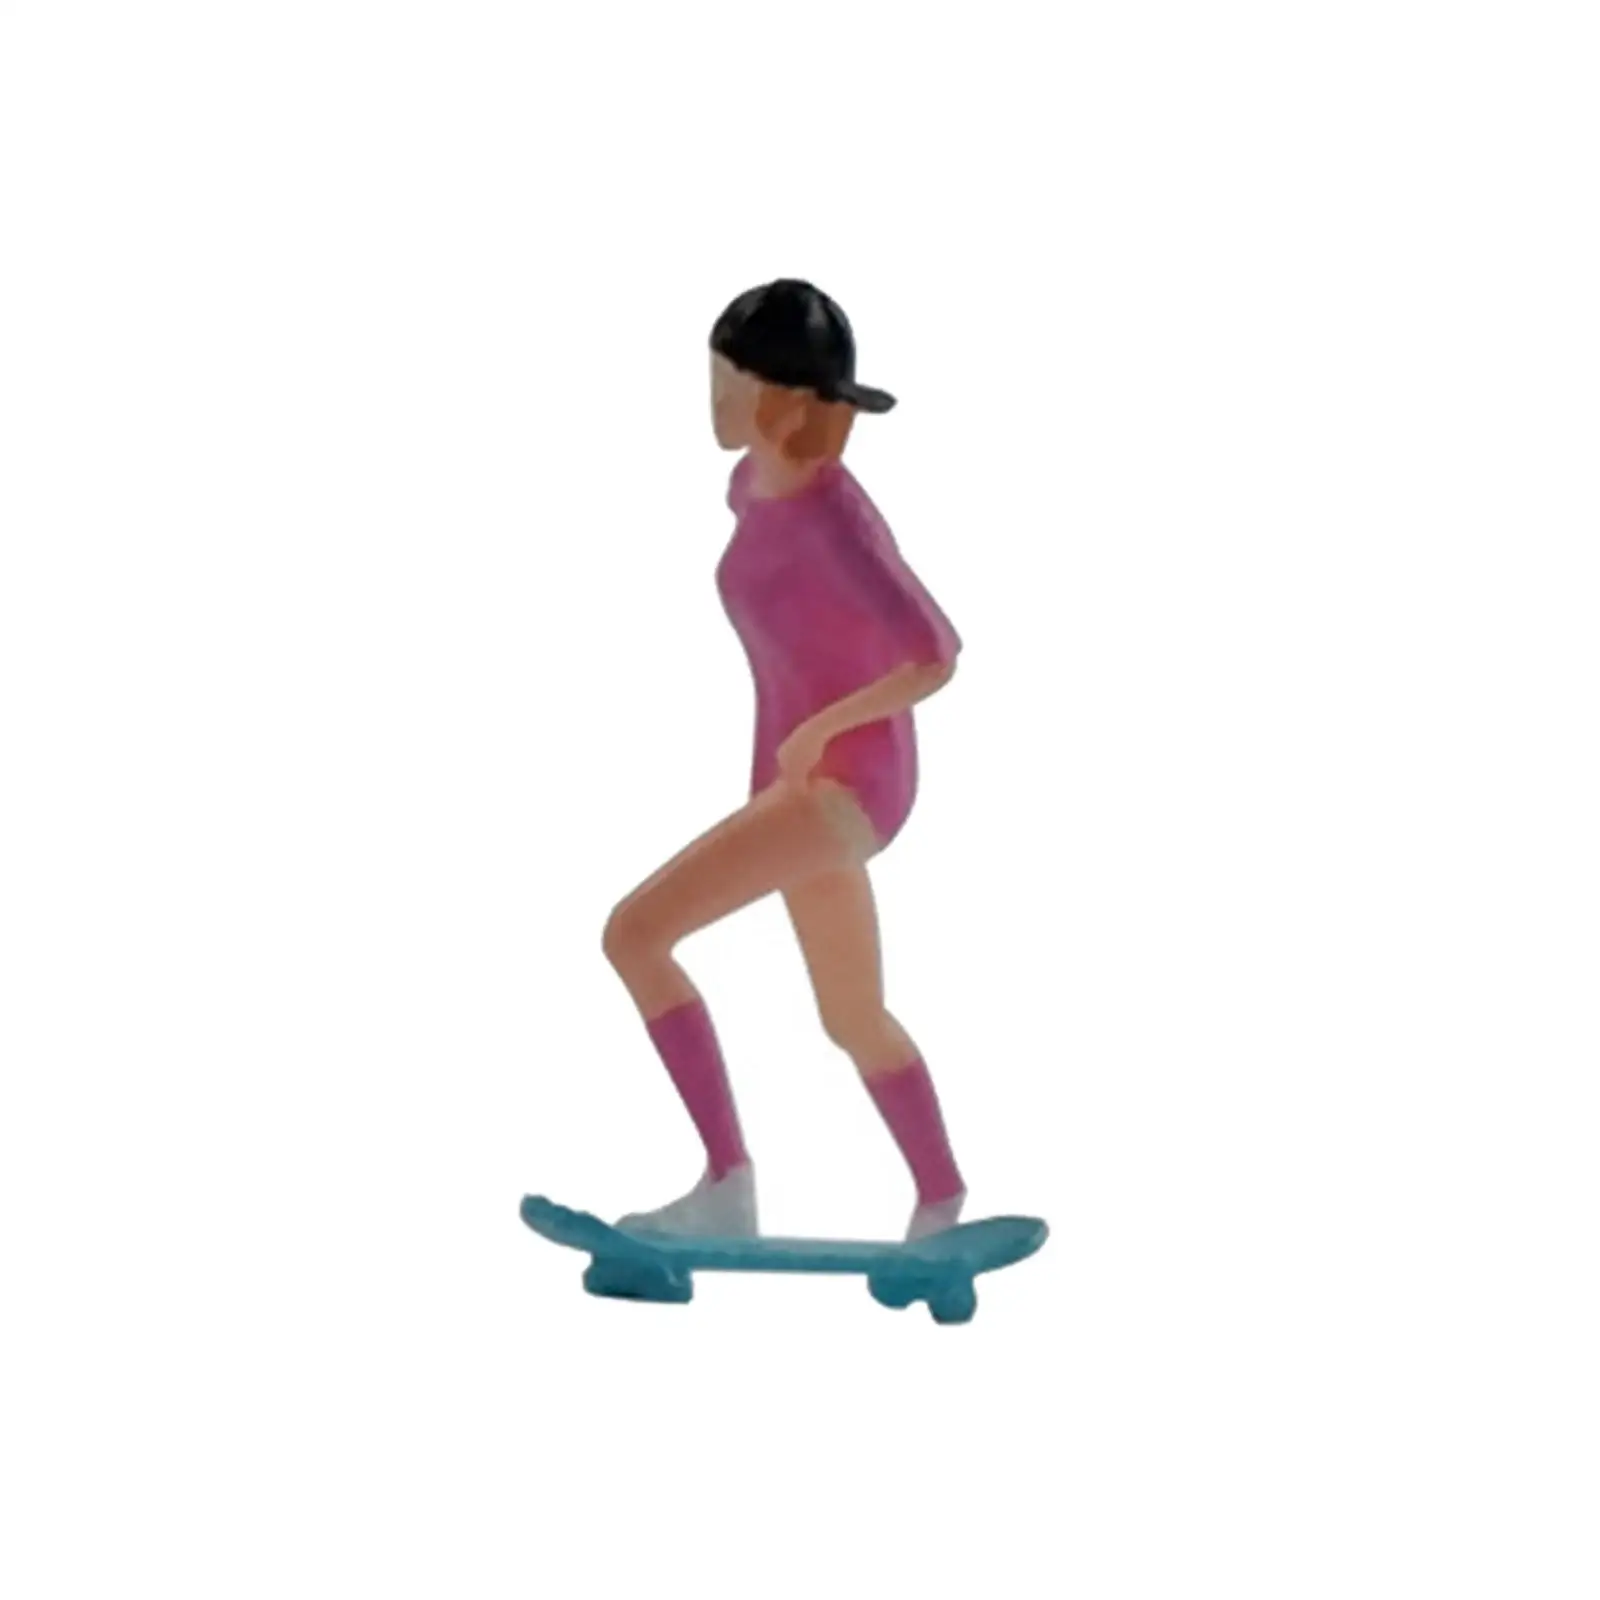 1/64 Scale People Figurines Skateboard Girl People for Dioramas Layout Decor